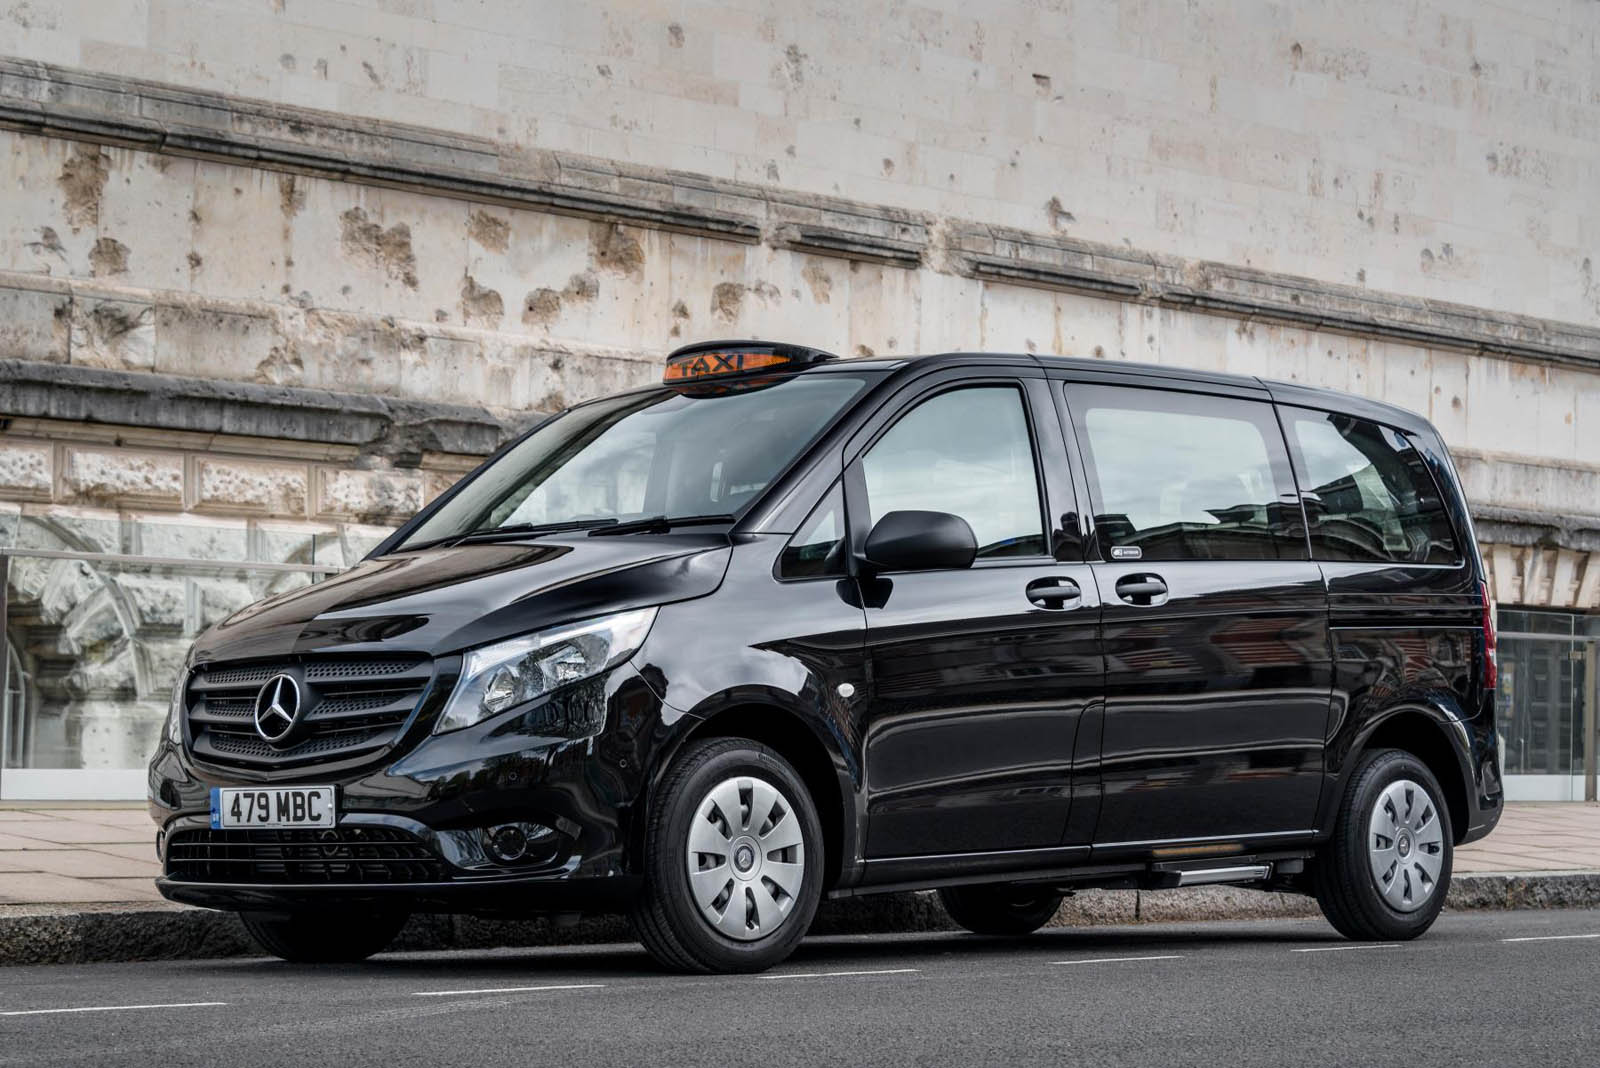 Mercedes Sells More London Taxis Than 